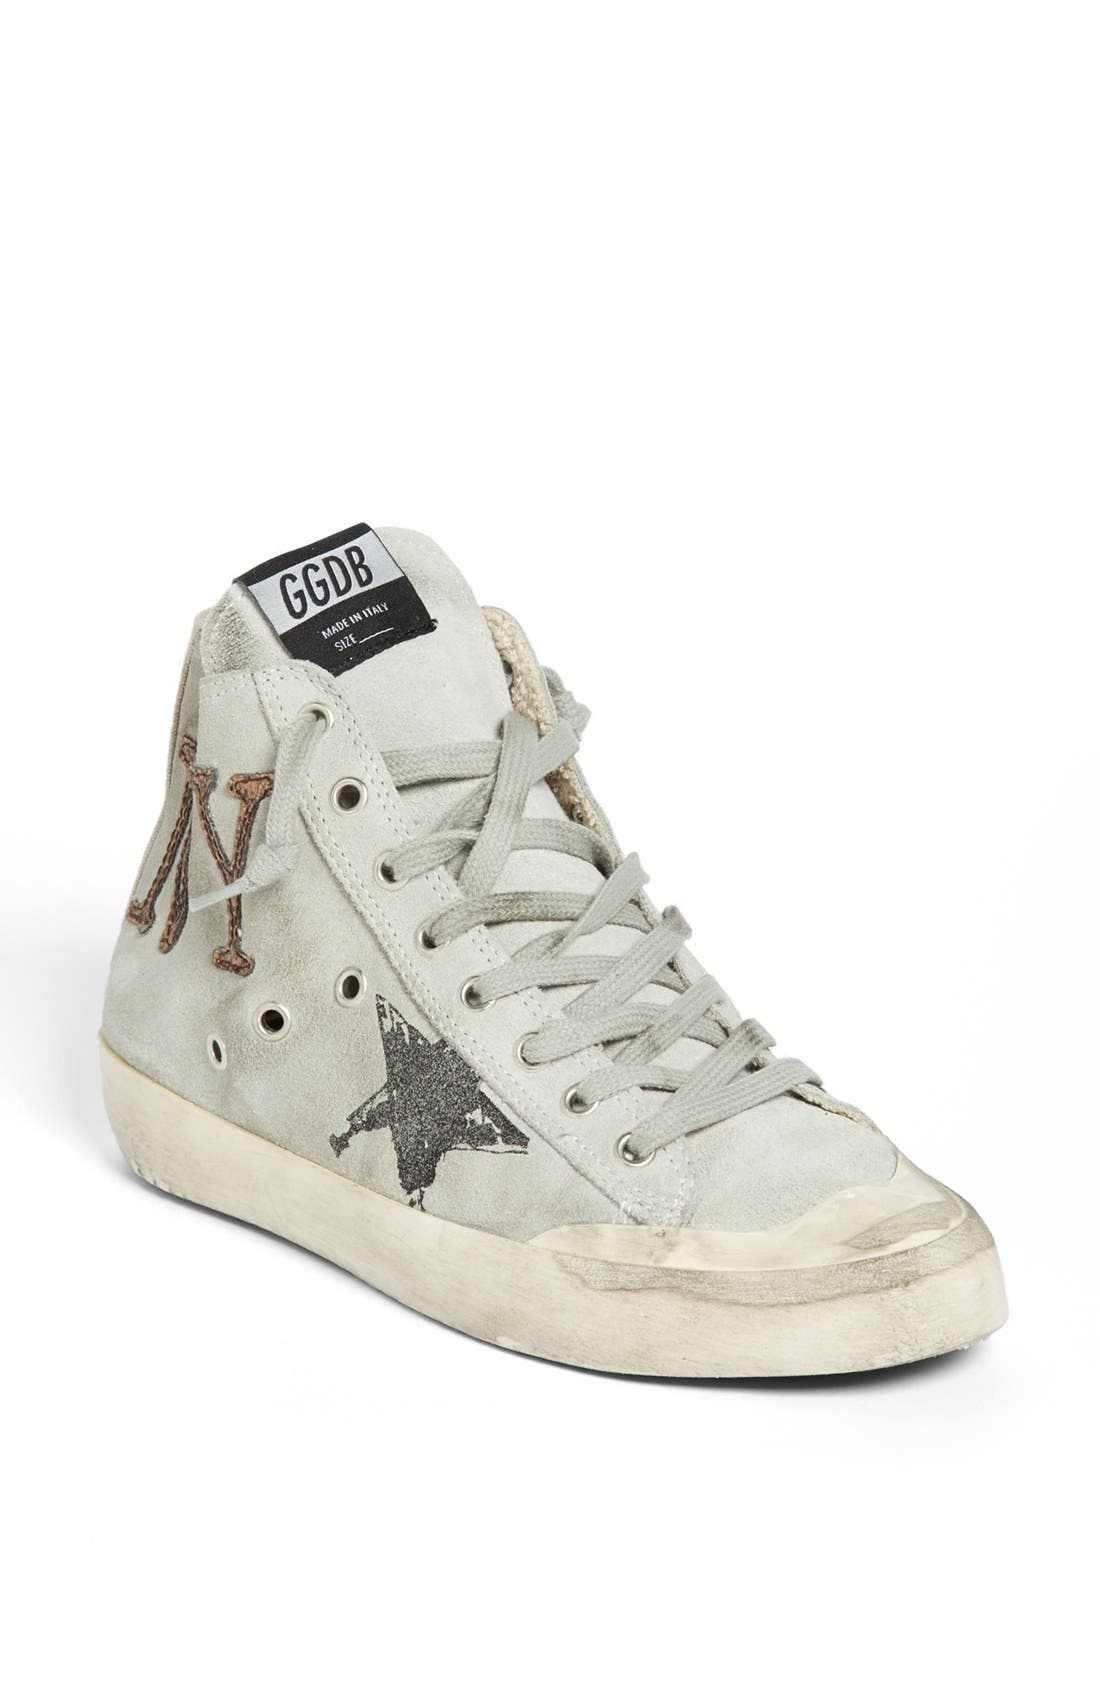 sizing for golden goose sneakers